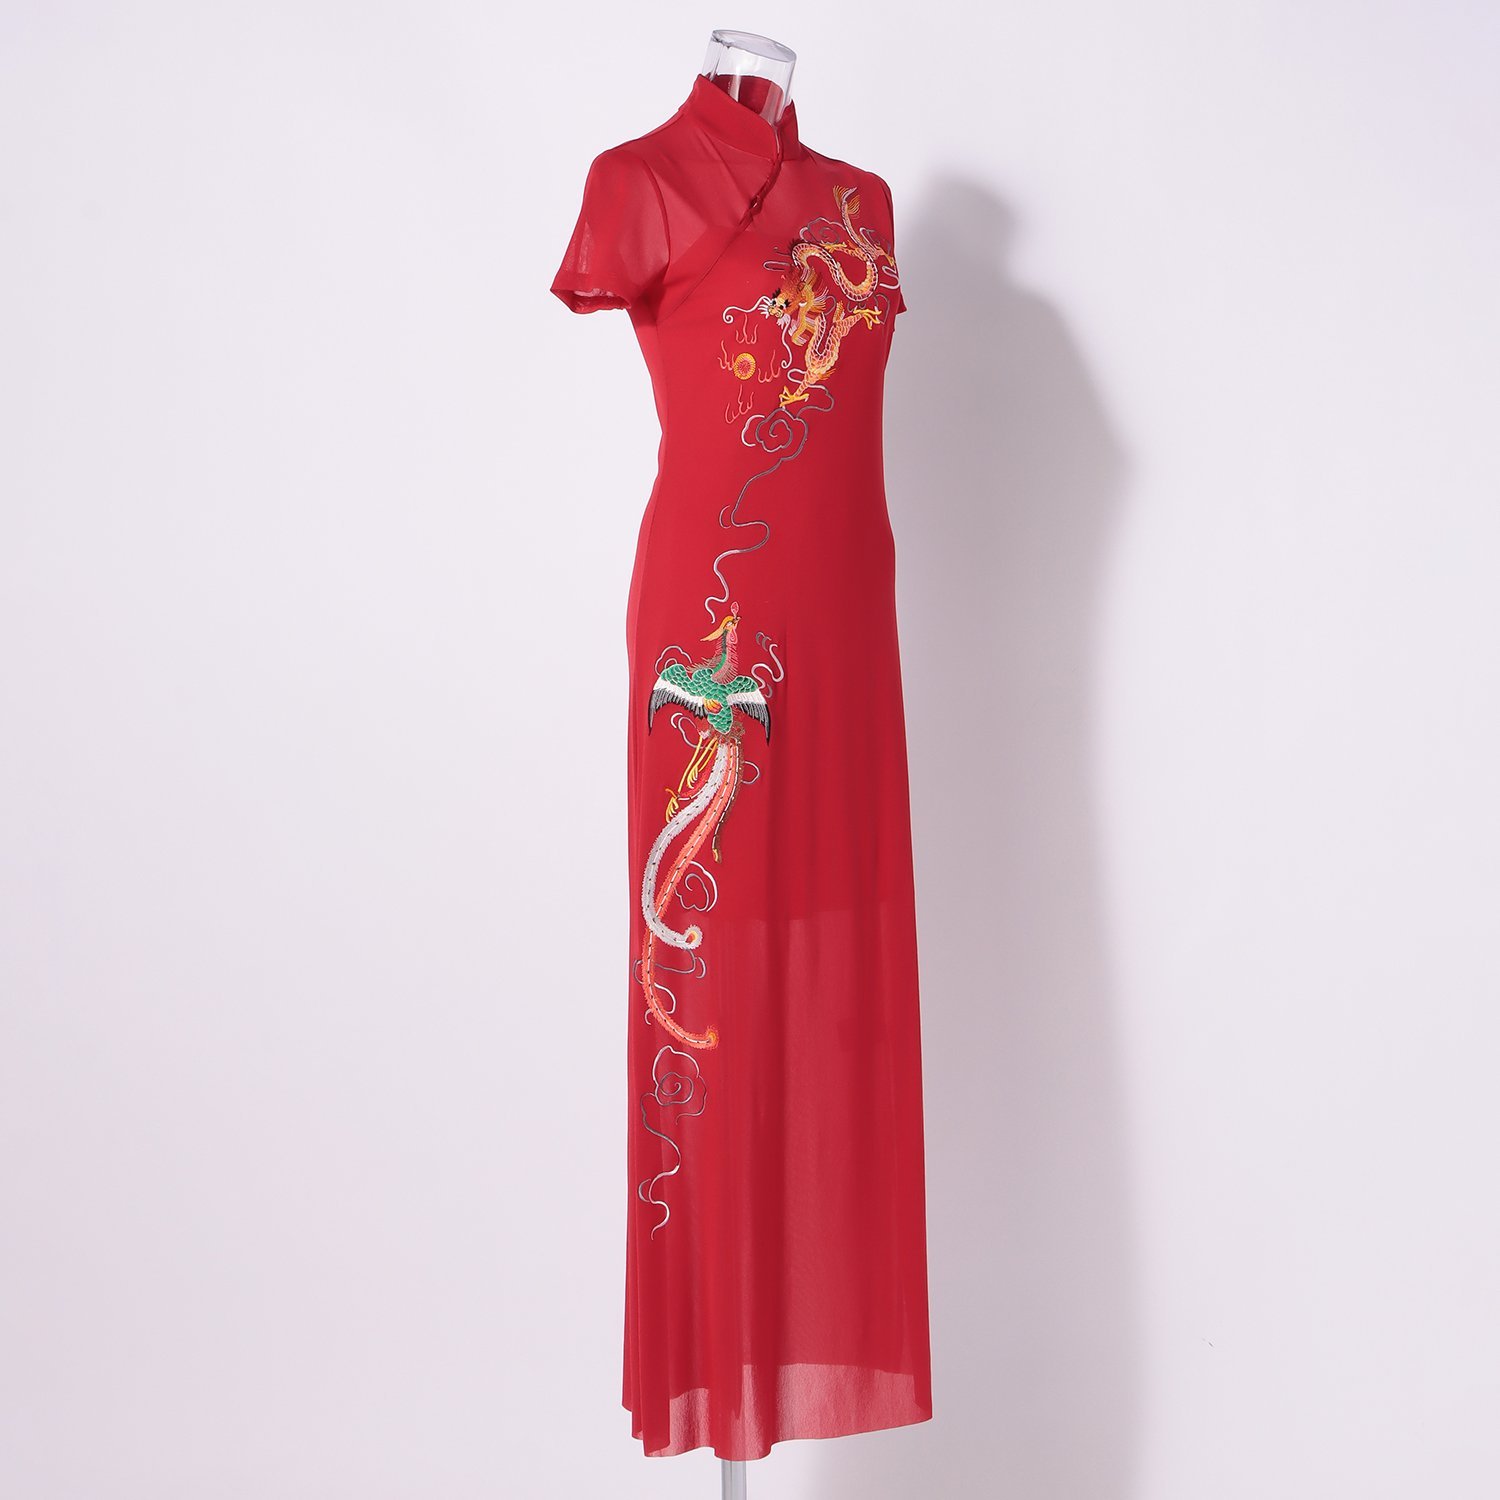 ZLVWB Traditional Chinese Bride Wedding Party Toast Dresses Embroidery Dragon  Phoenix Cheongsam Marry Dress Satin Skirt (Color : D, Size : 3XL code) :  Amazon.co.uk: Fashion